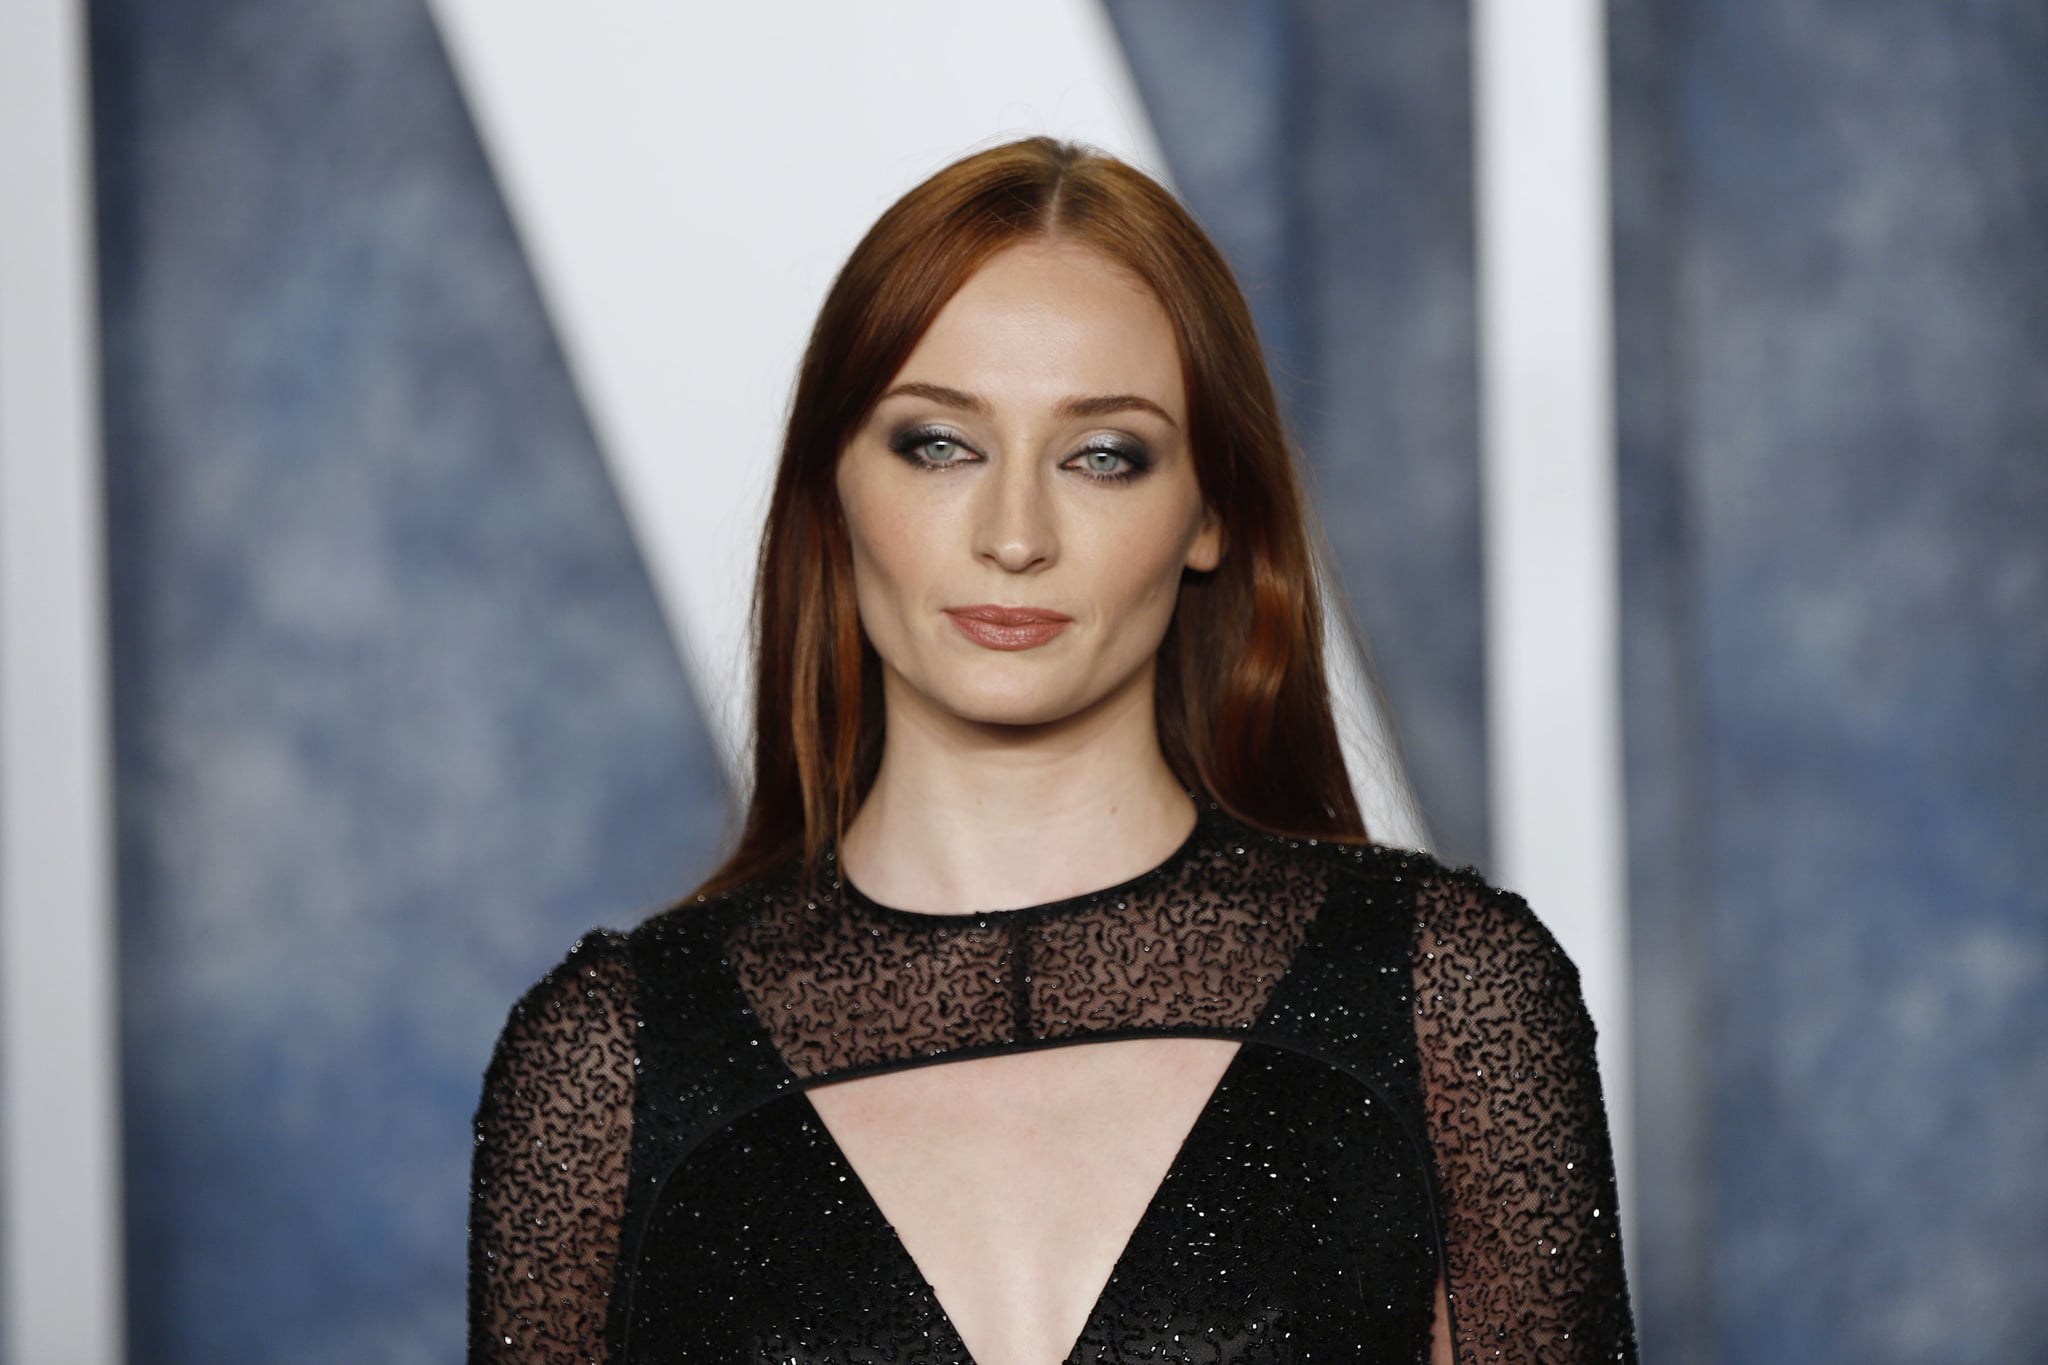 BEVERLY HILLS, CA - MARCH 12: Sophie Turner attends 2023 Vanity Fair Oscar After Party Arrivals at Wallis Annenberg Centre for the Performing Arts on March 12, 2023 in Beverly Hills, California. (Photo by Robert Smith/Patrick McMullan via Getty Images)